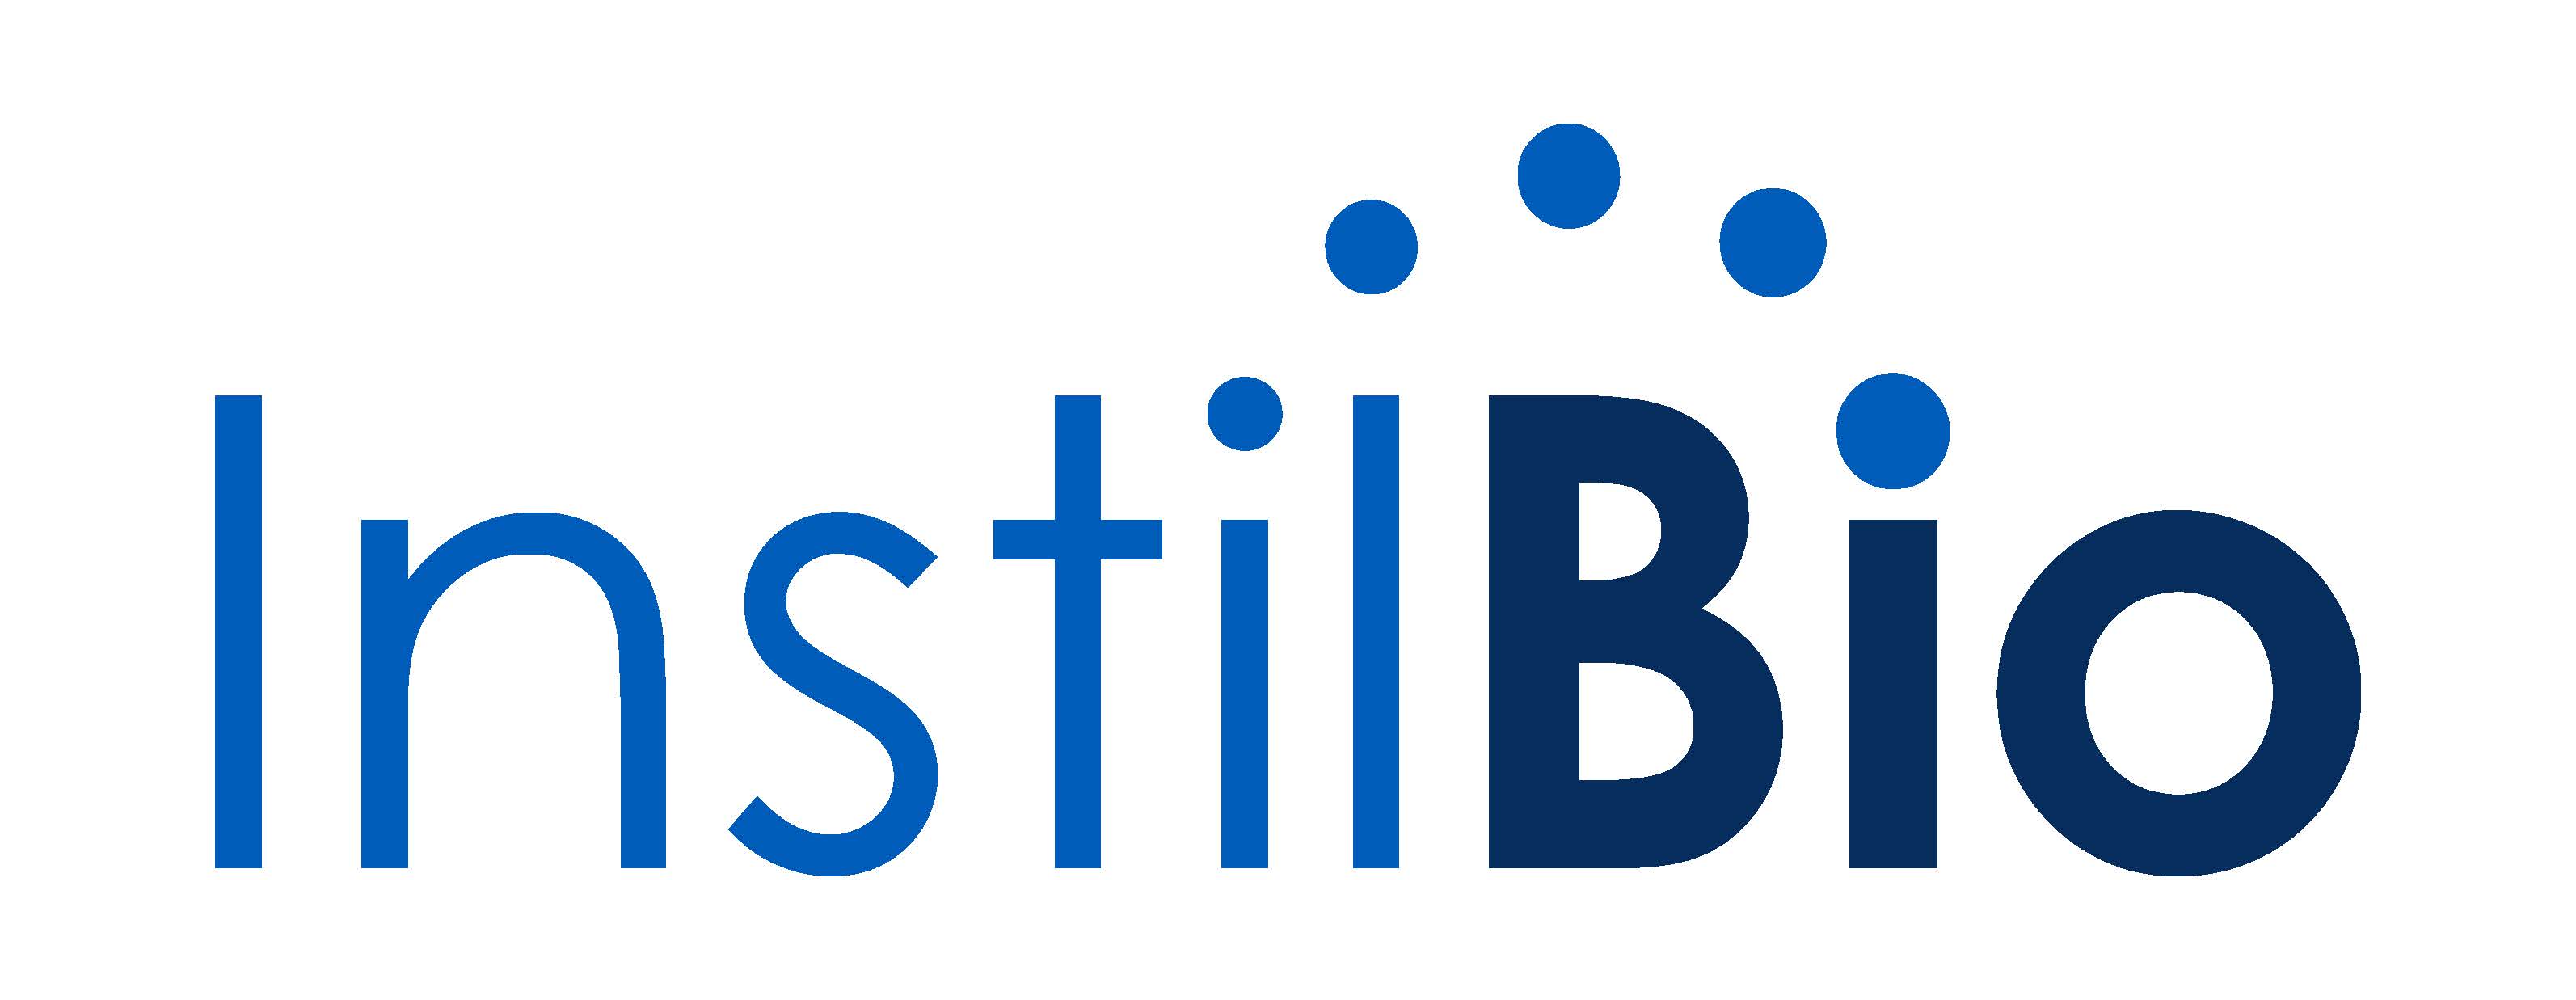 Instil Bio Announces Oral Presentation of ITIL-306 Preclinical Data at British Society for Gene and Cell Therapy Annual Conference